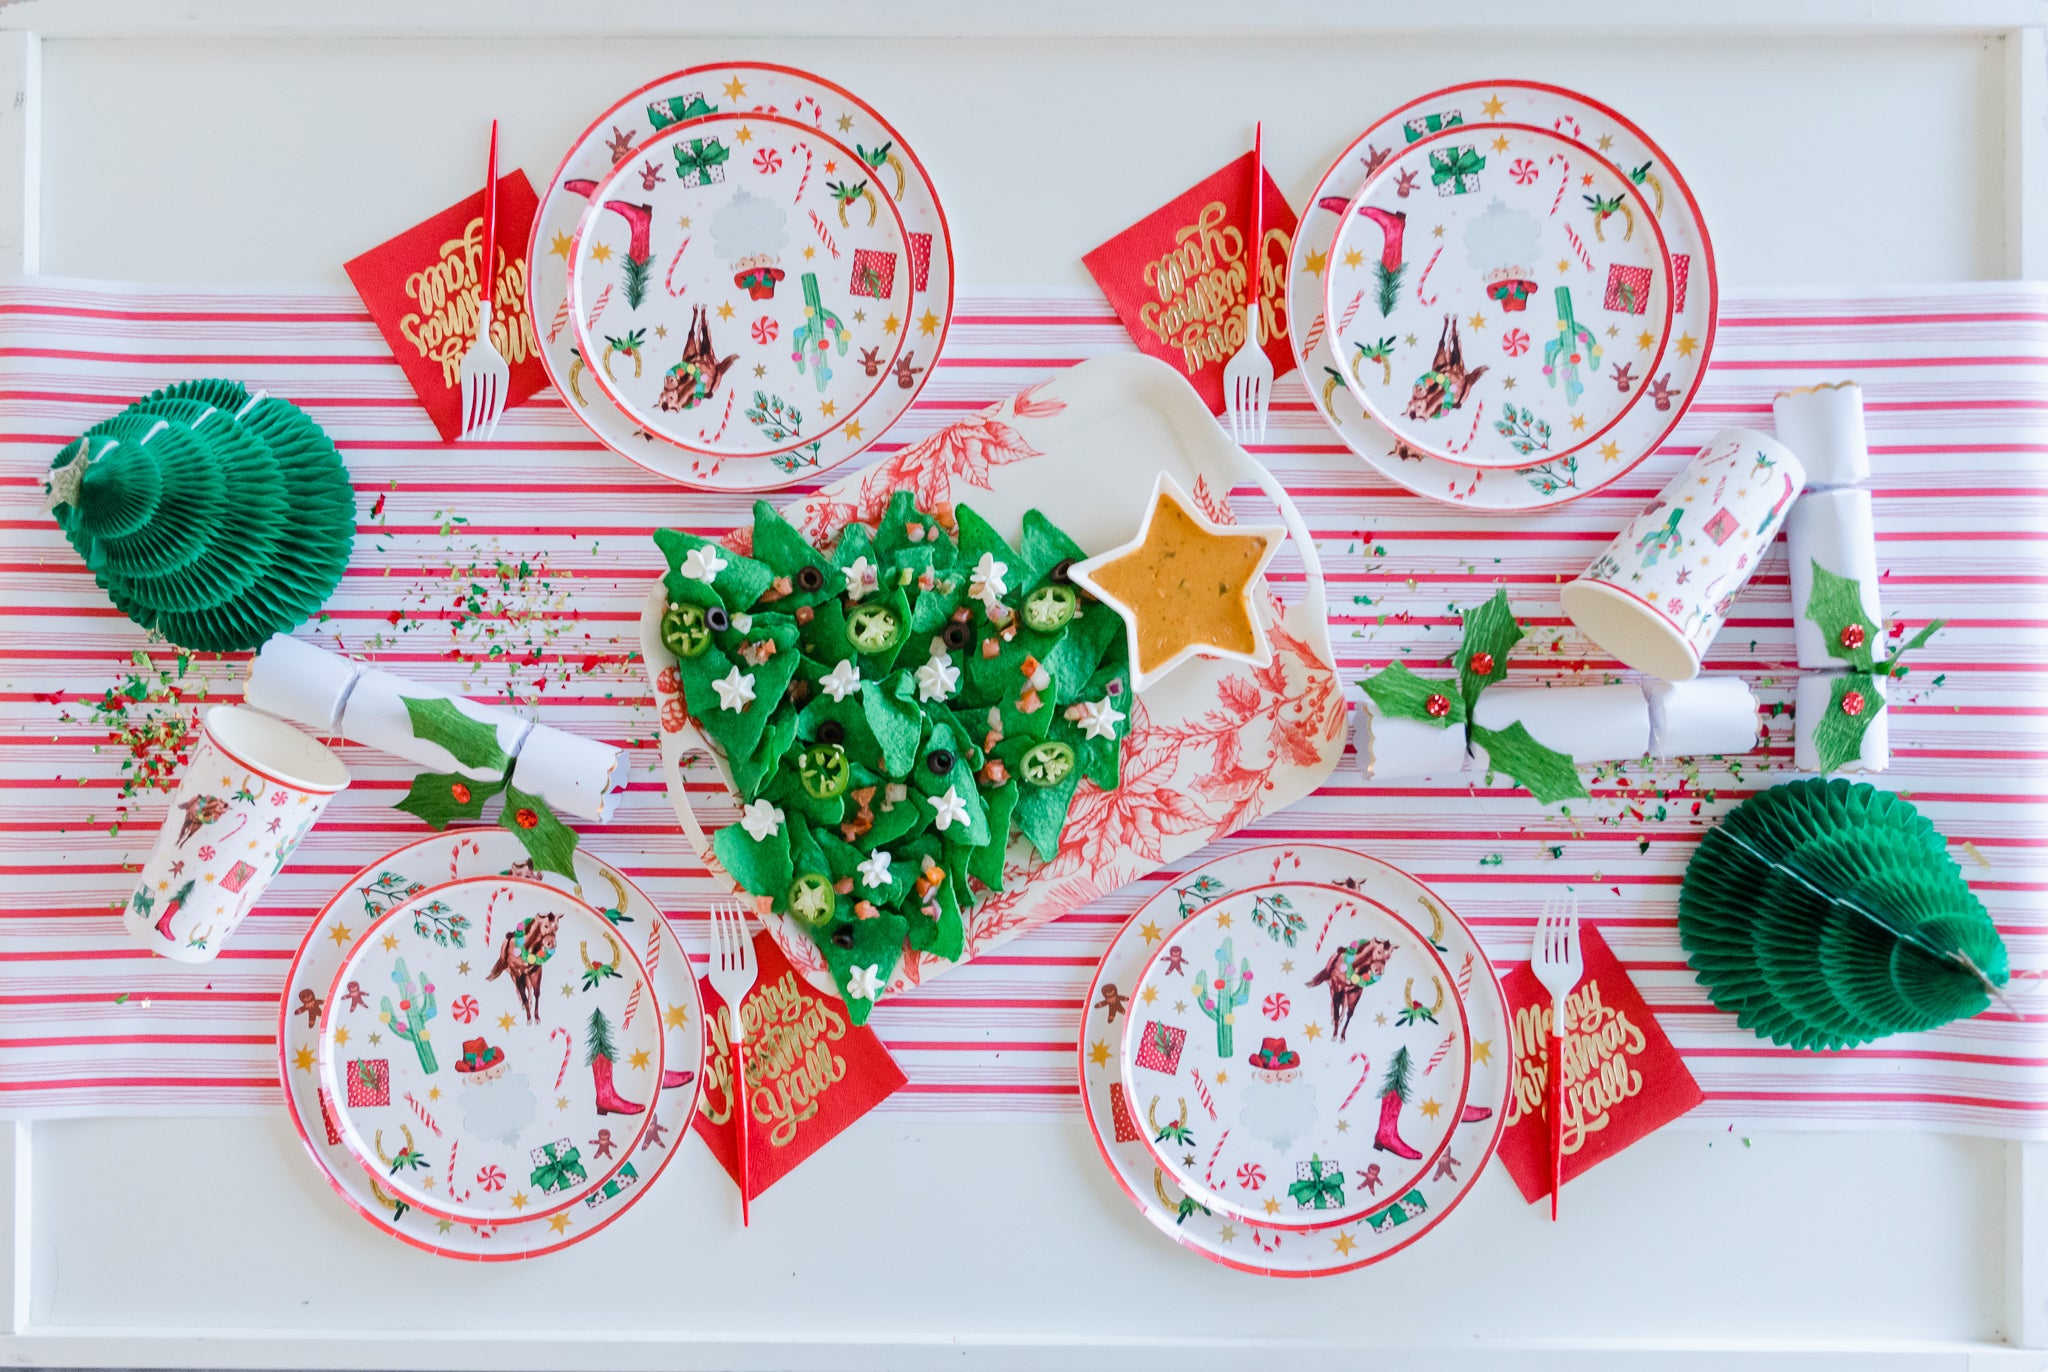 Cowboy Christmas table setting and party food ideas.